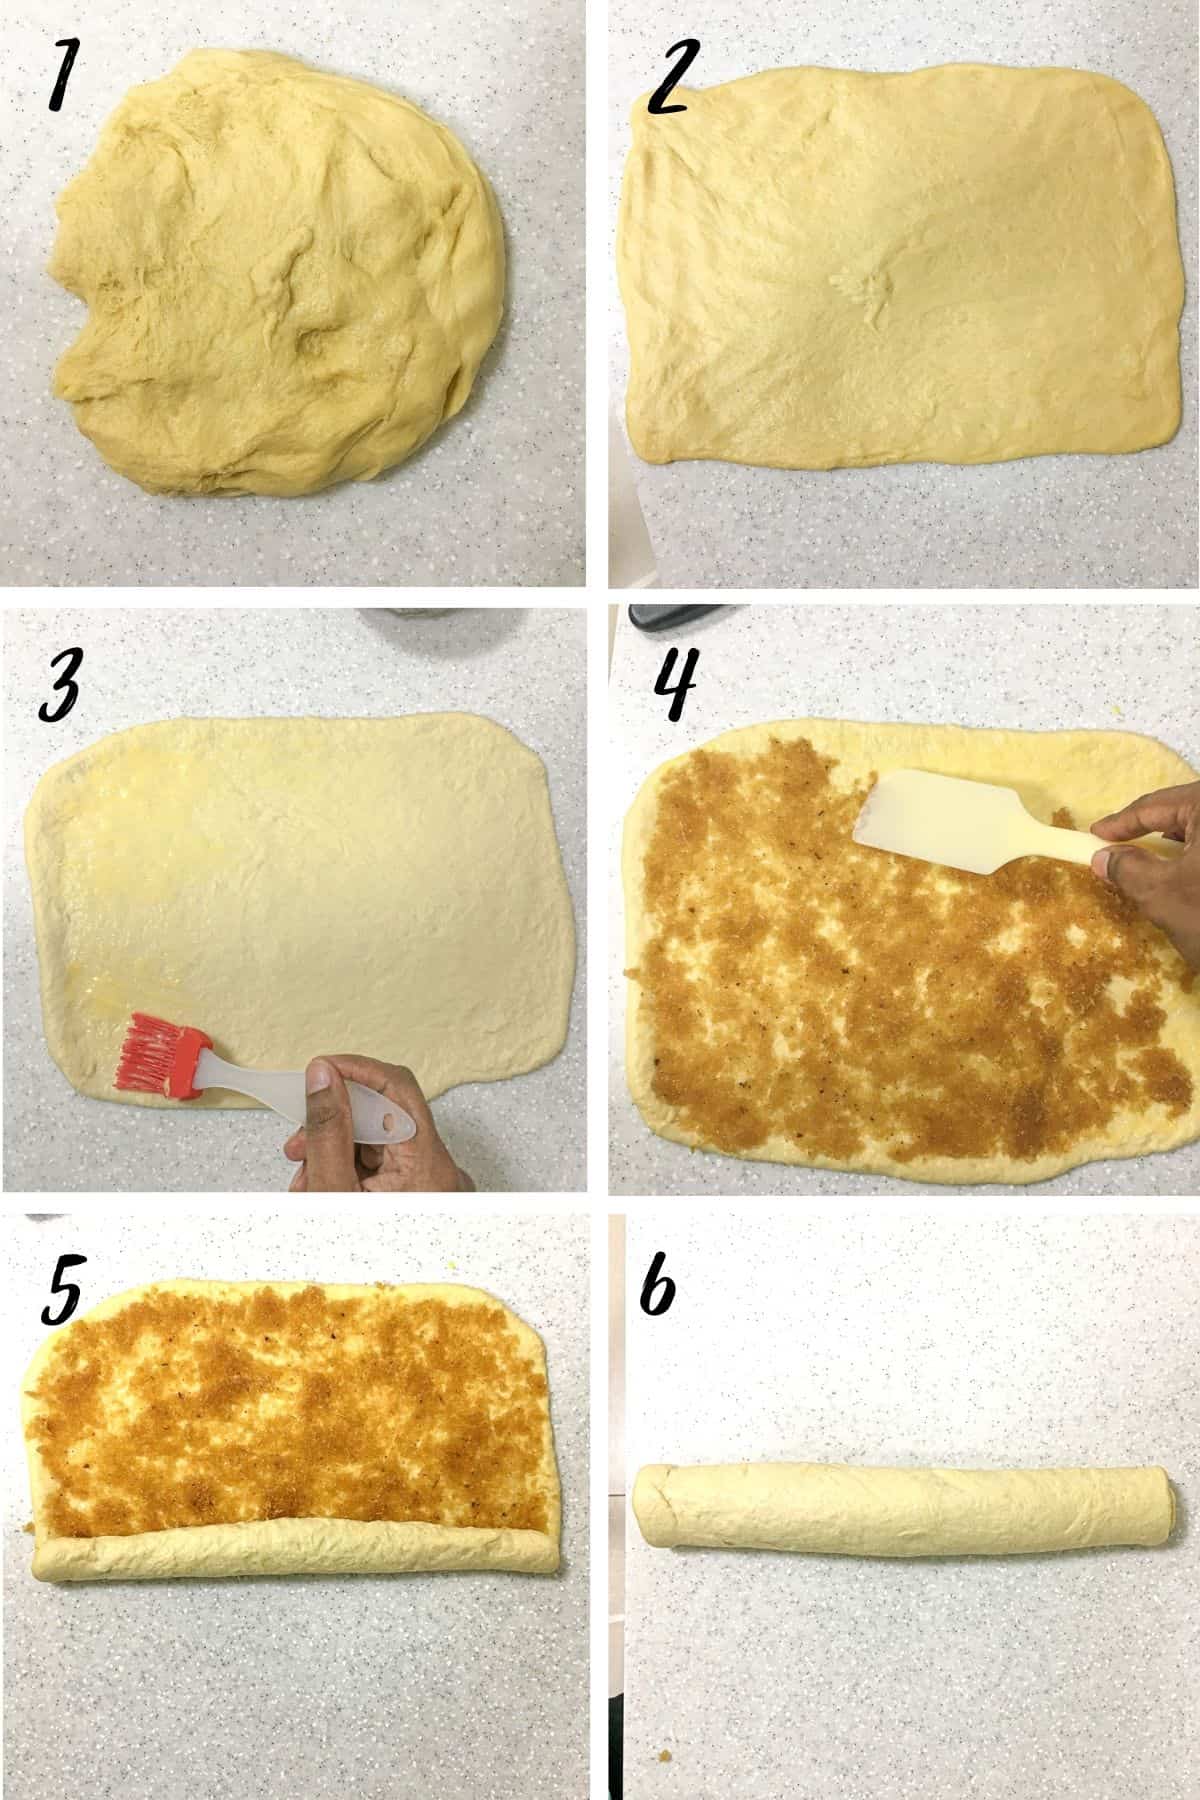 A poster of 6 images showing how to roll and make coconut rolls